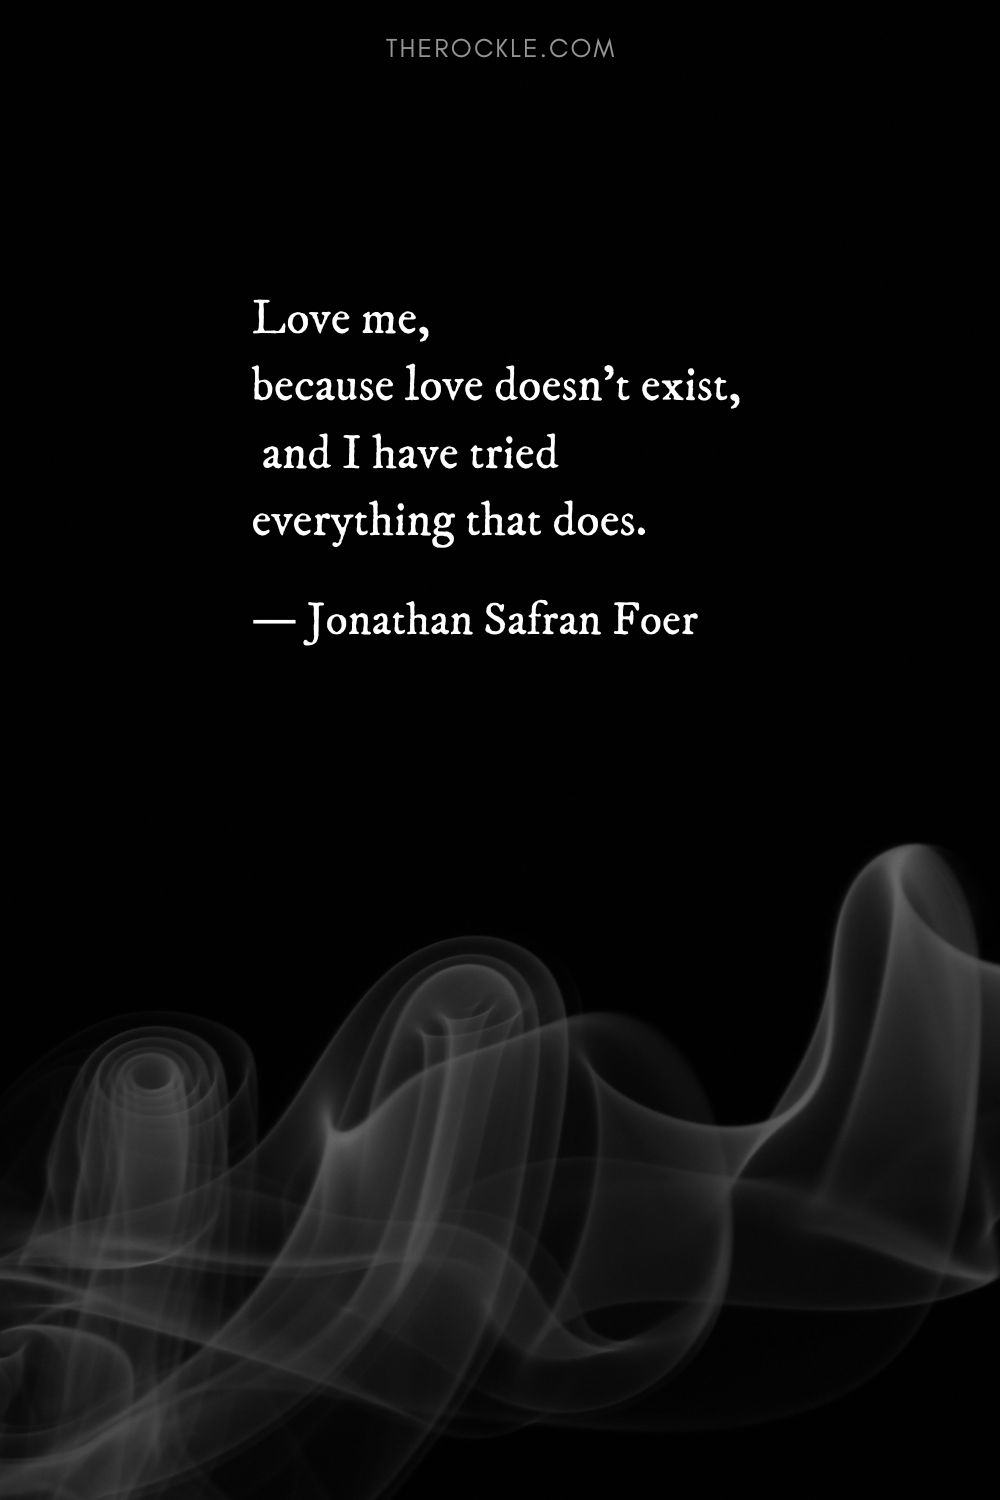 Jonathan Safran Foer's dark quote about love: “Love me, because love doesn't exist, and I have tried everything that does.”